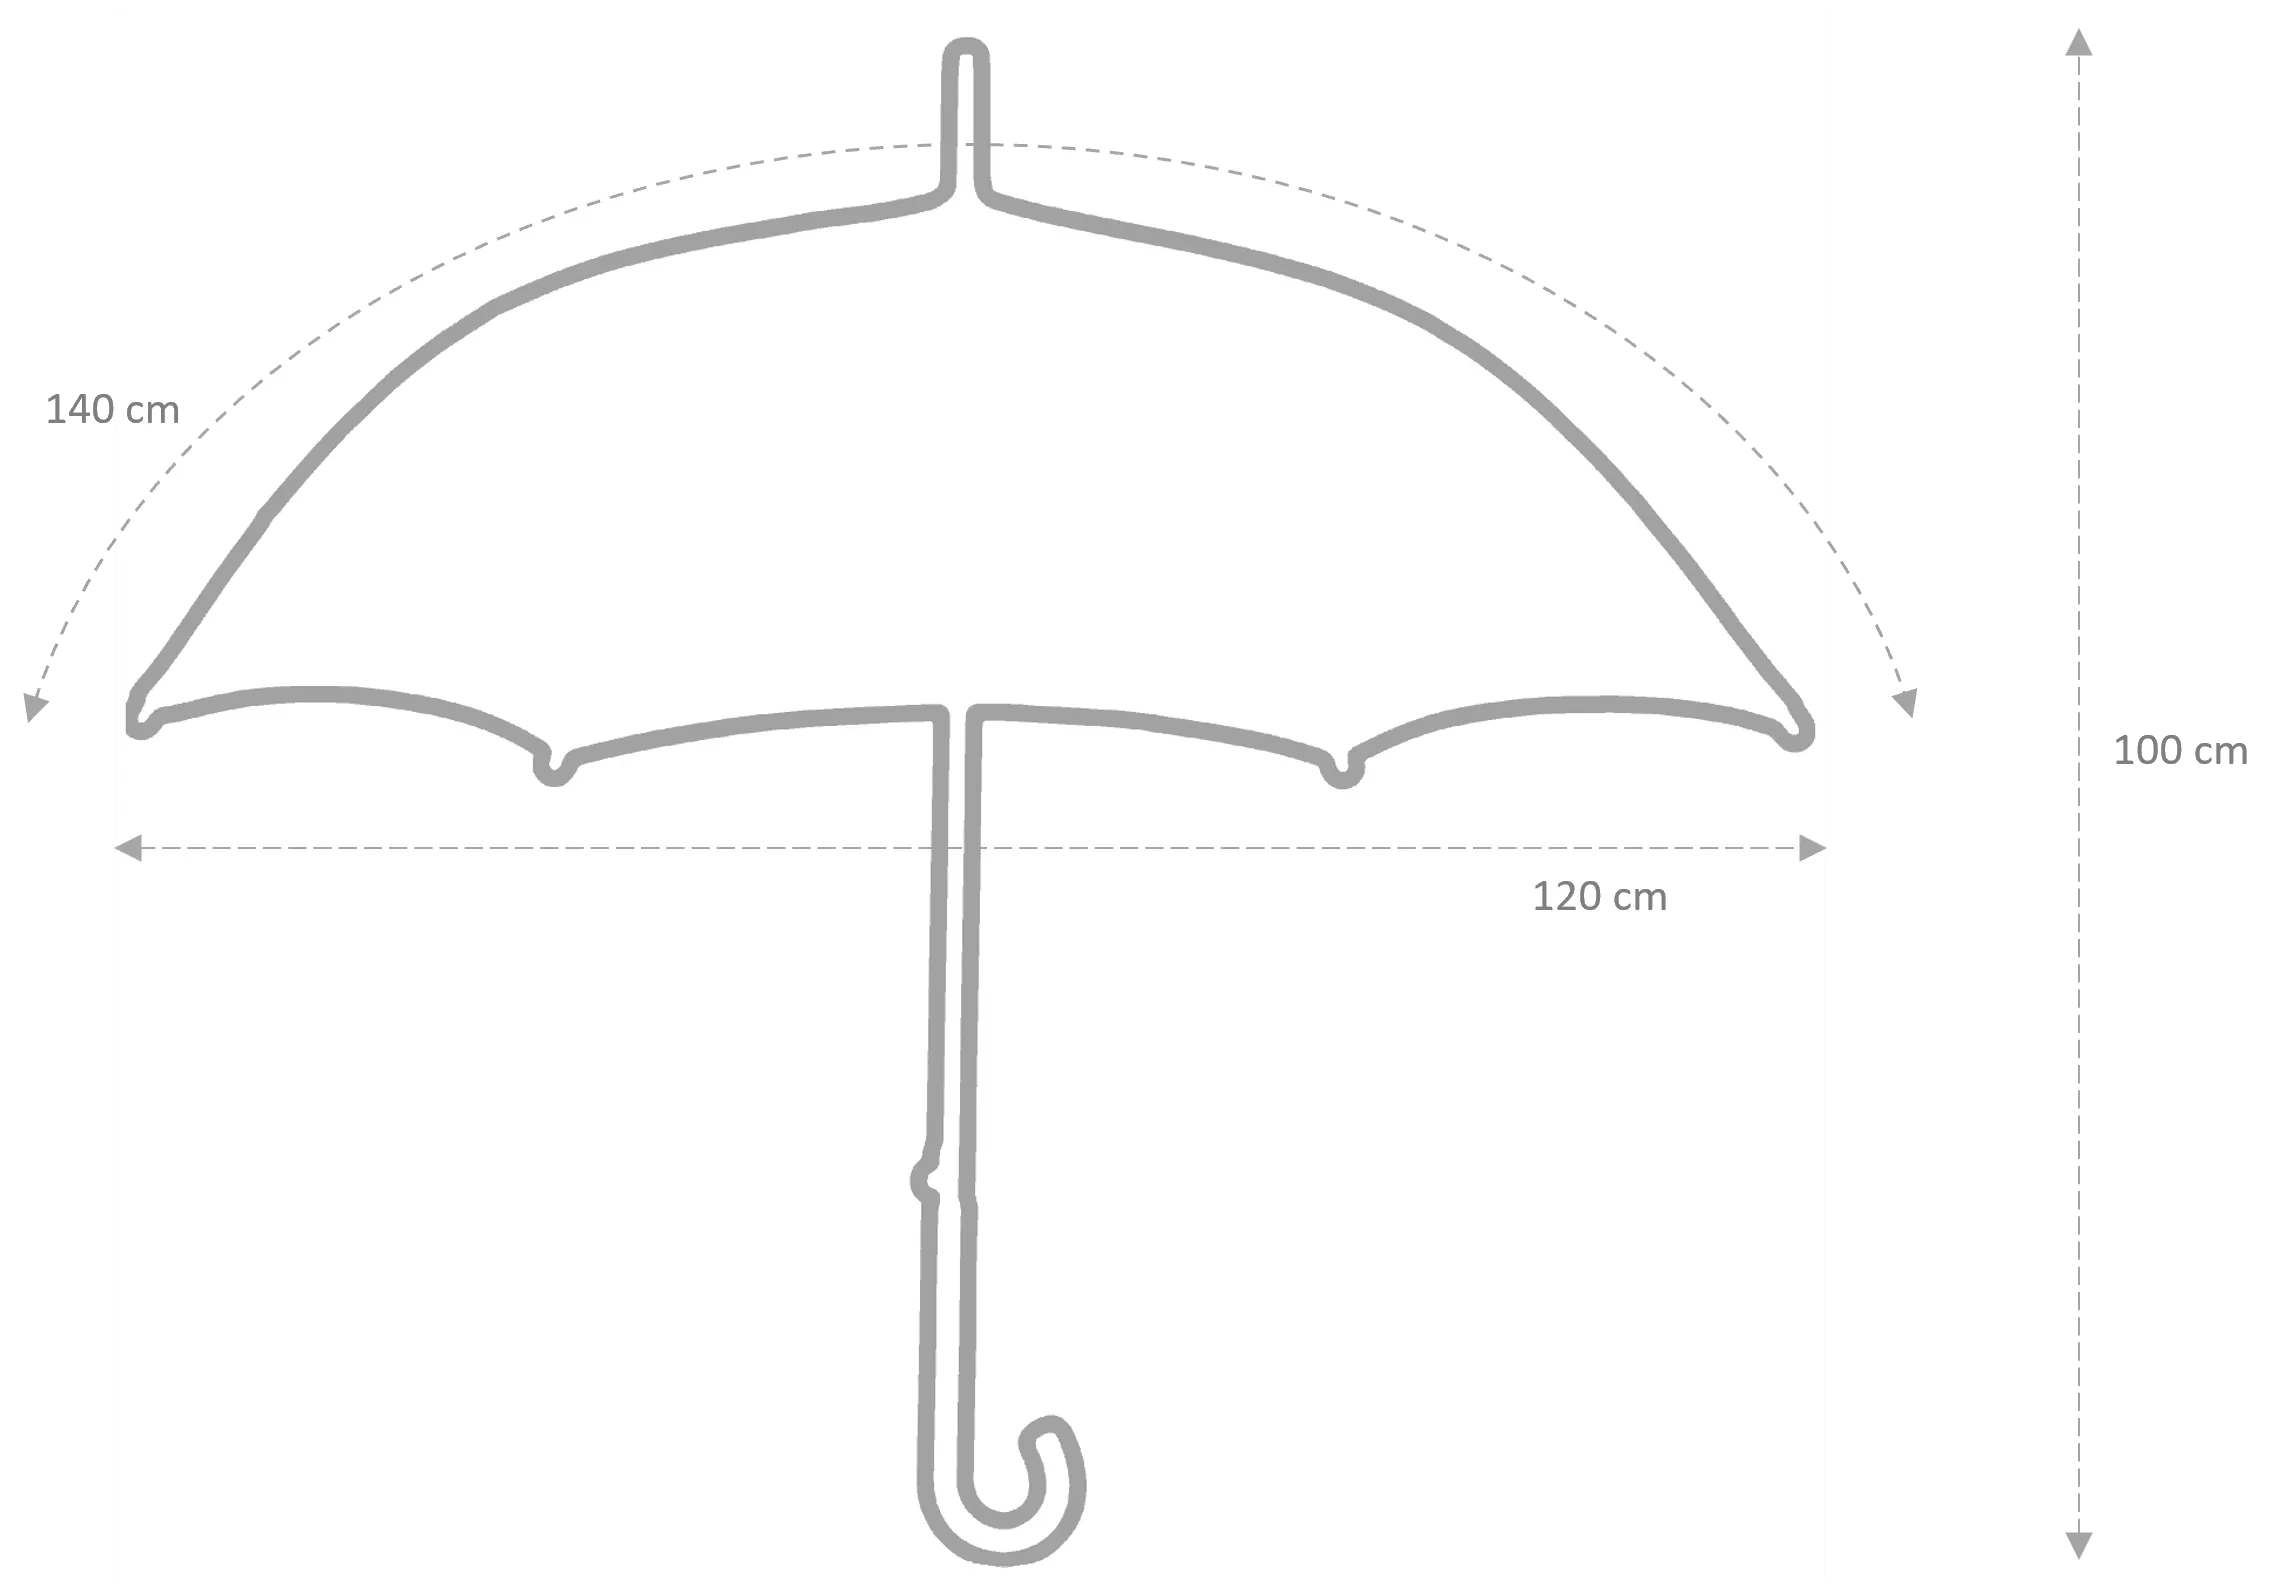 hidewise-london-umbrella-wooden-J-handle-strong-premium-quality-brolly-brown-gust-proof-straight-golf-size-professional-elegant-sturdy-wind-proof-canopy-size